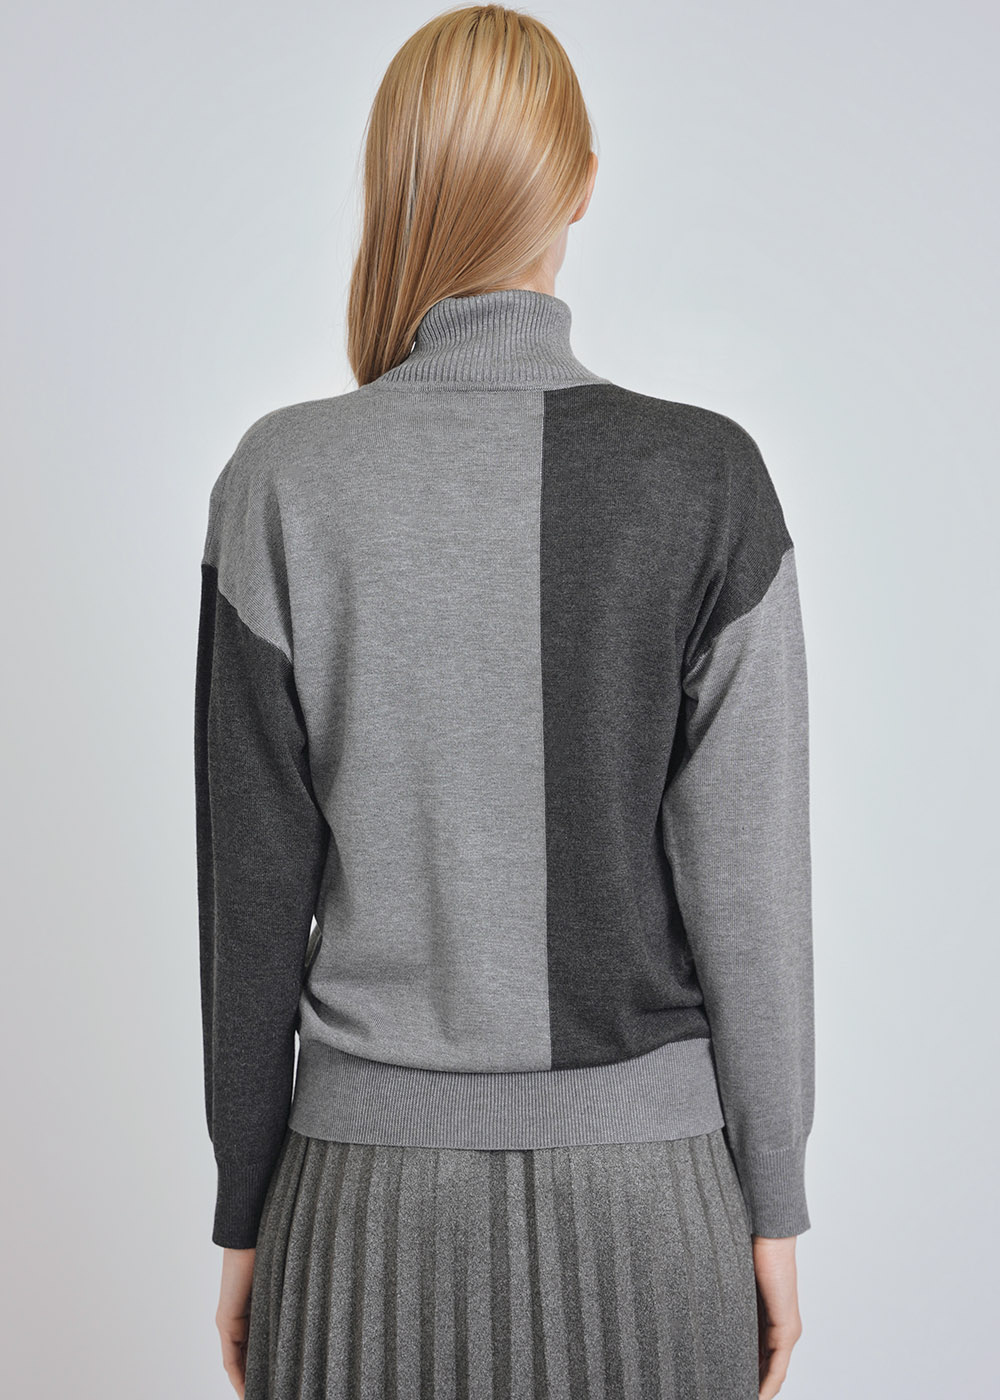 Relaxed Grey High Neck Color Block Knit